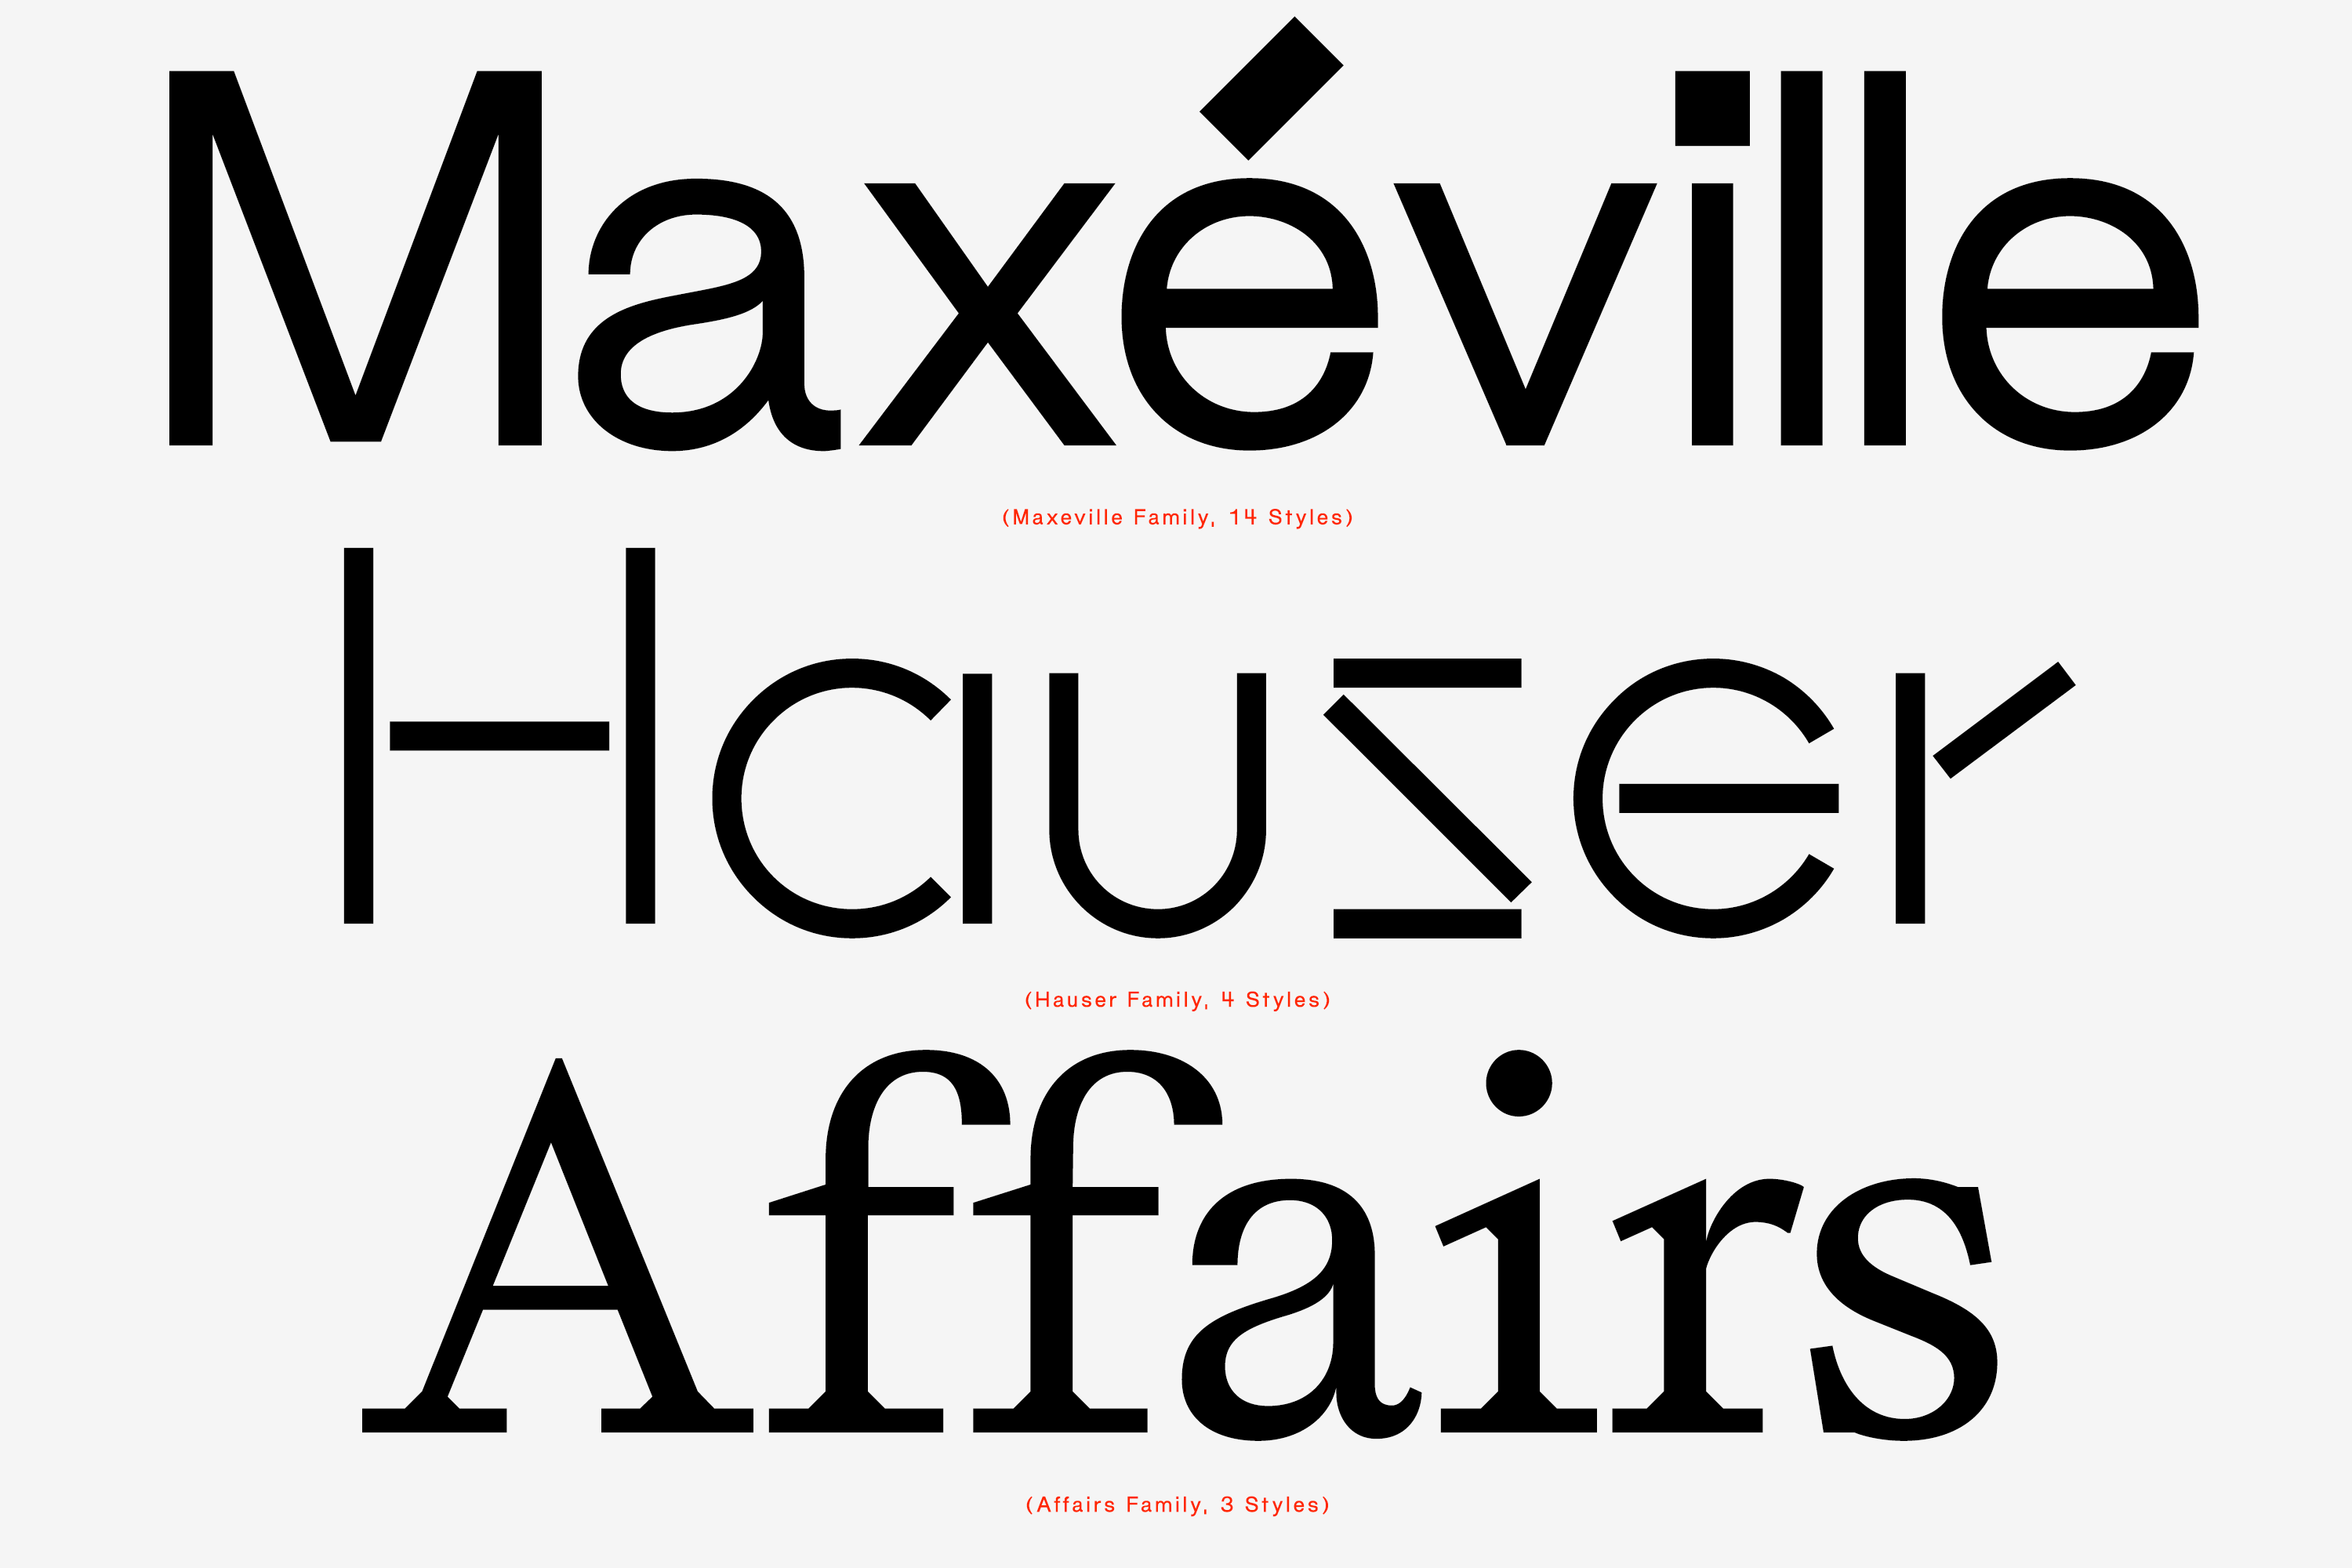 Typeface Selection